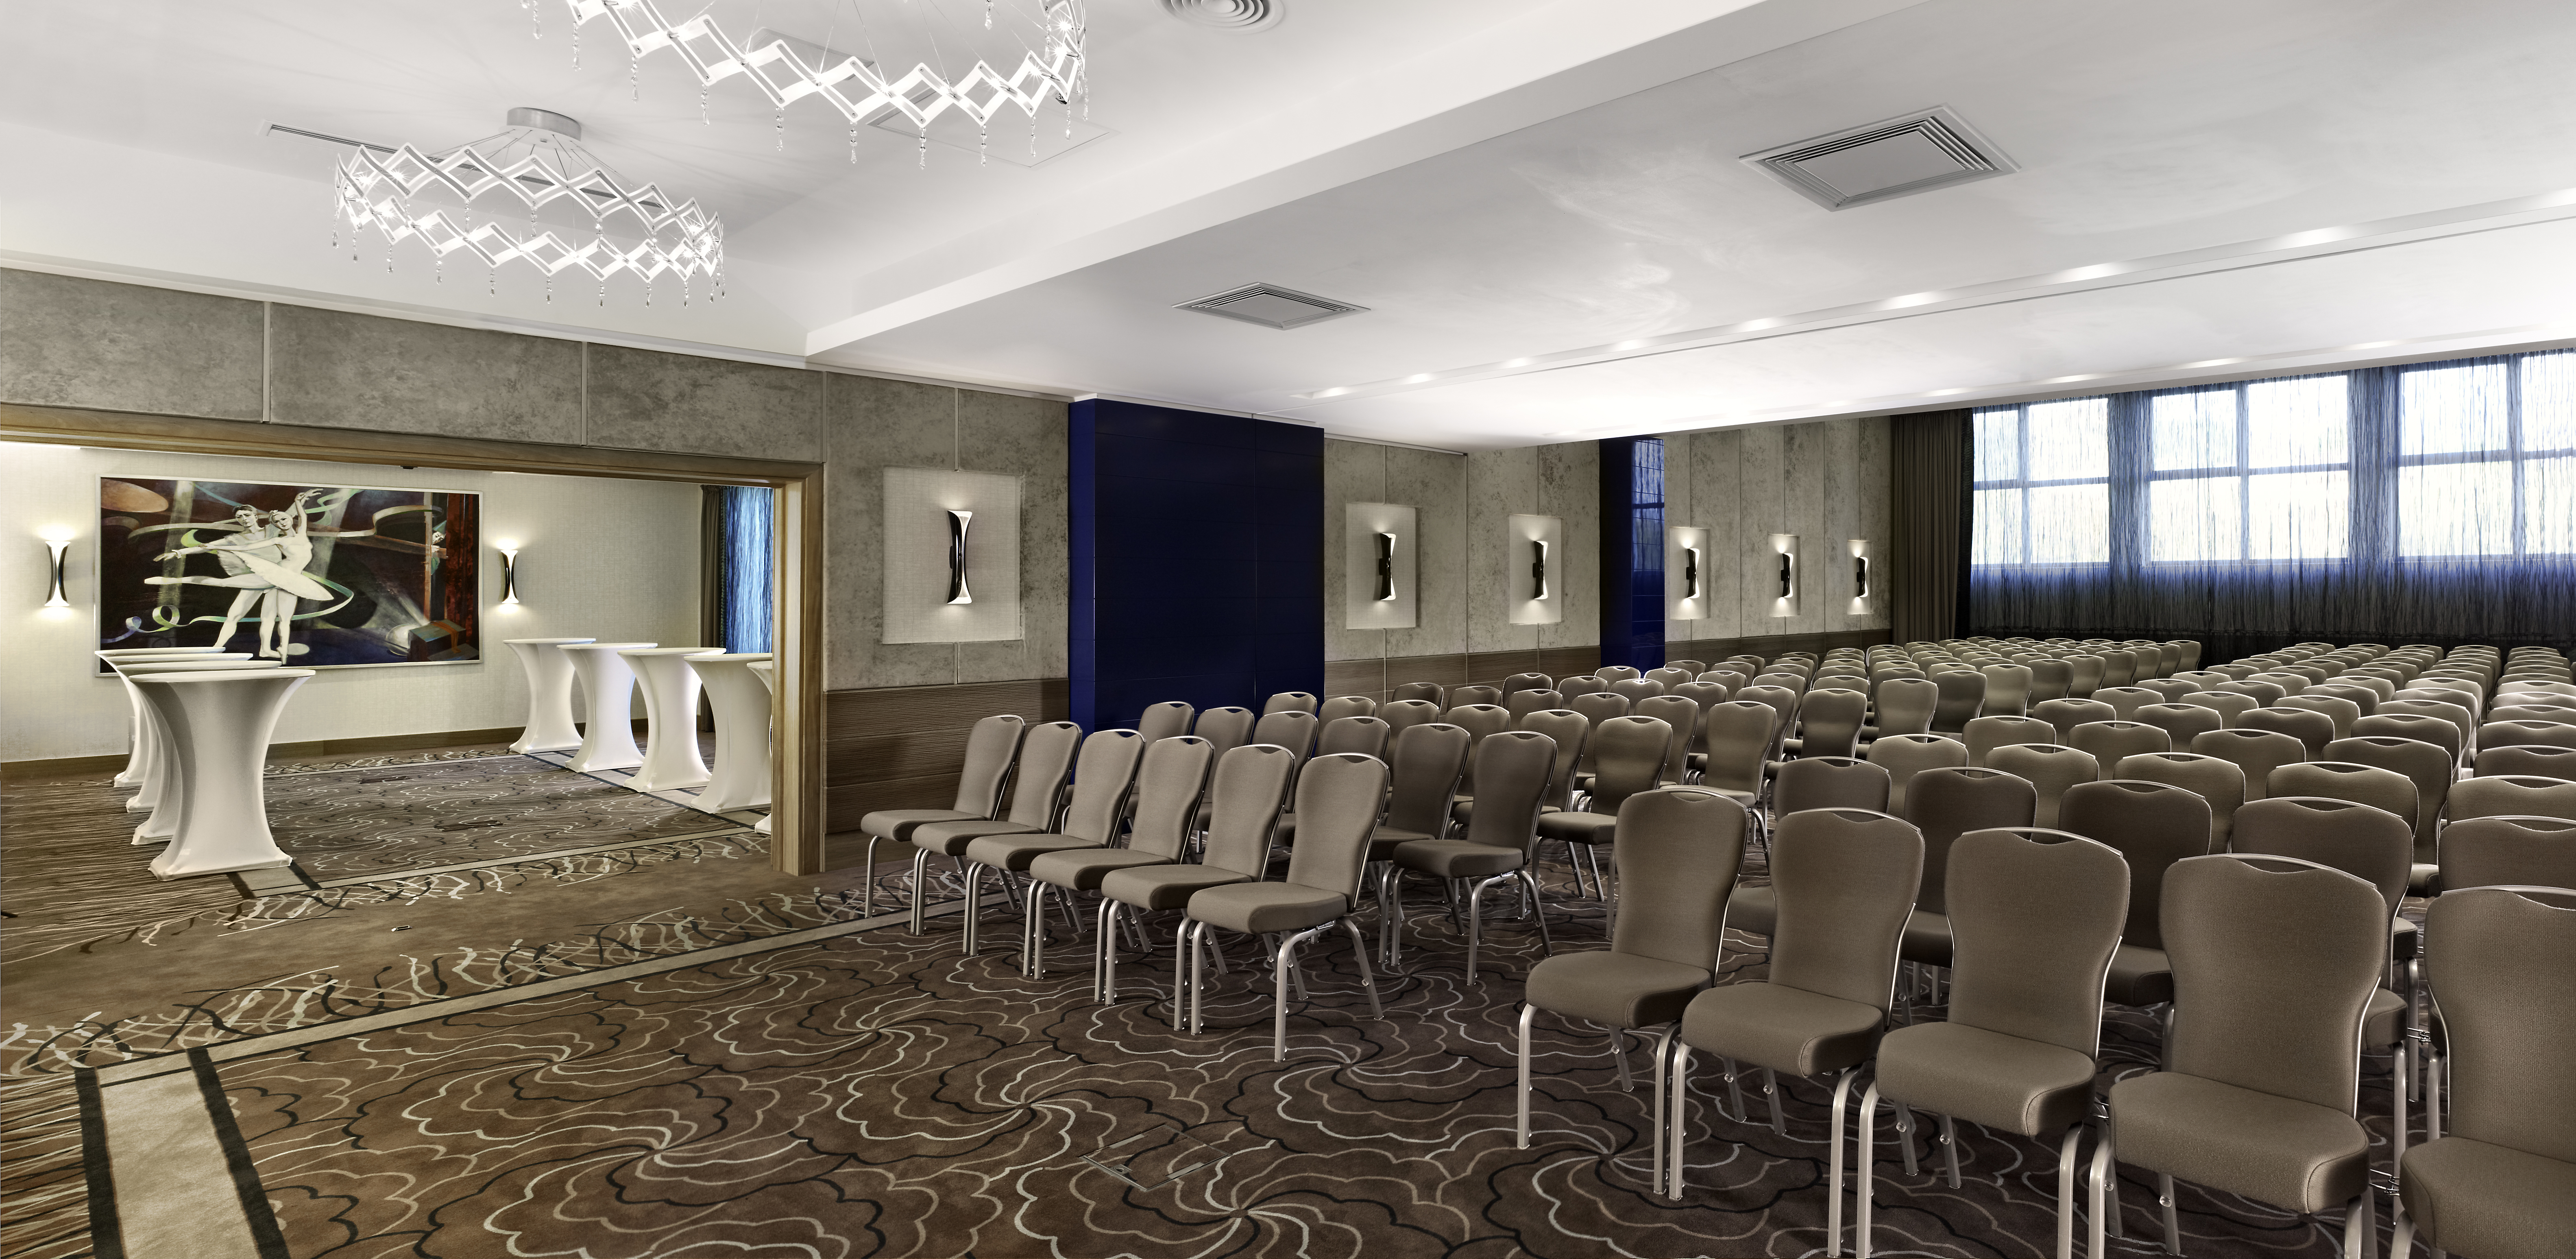 Varadinum Ballroom With Rows of Chairs Arranged Theater Style and View of Cocktail Tables and Wall Art in Breakout Room